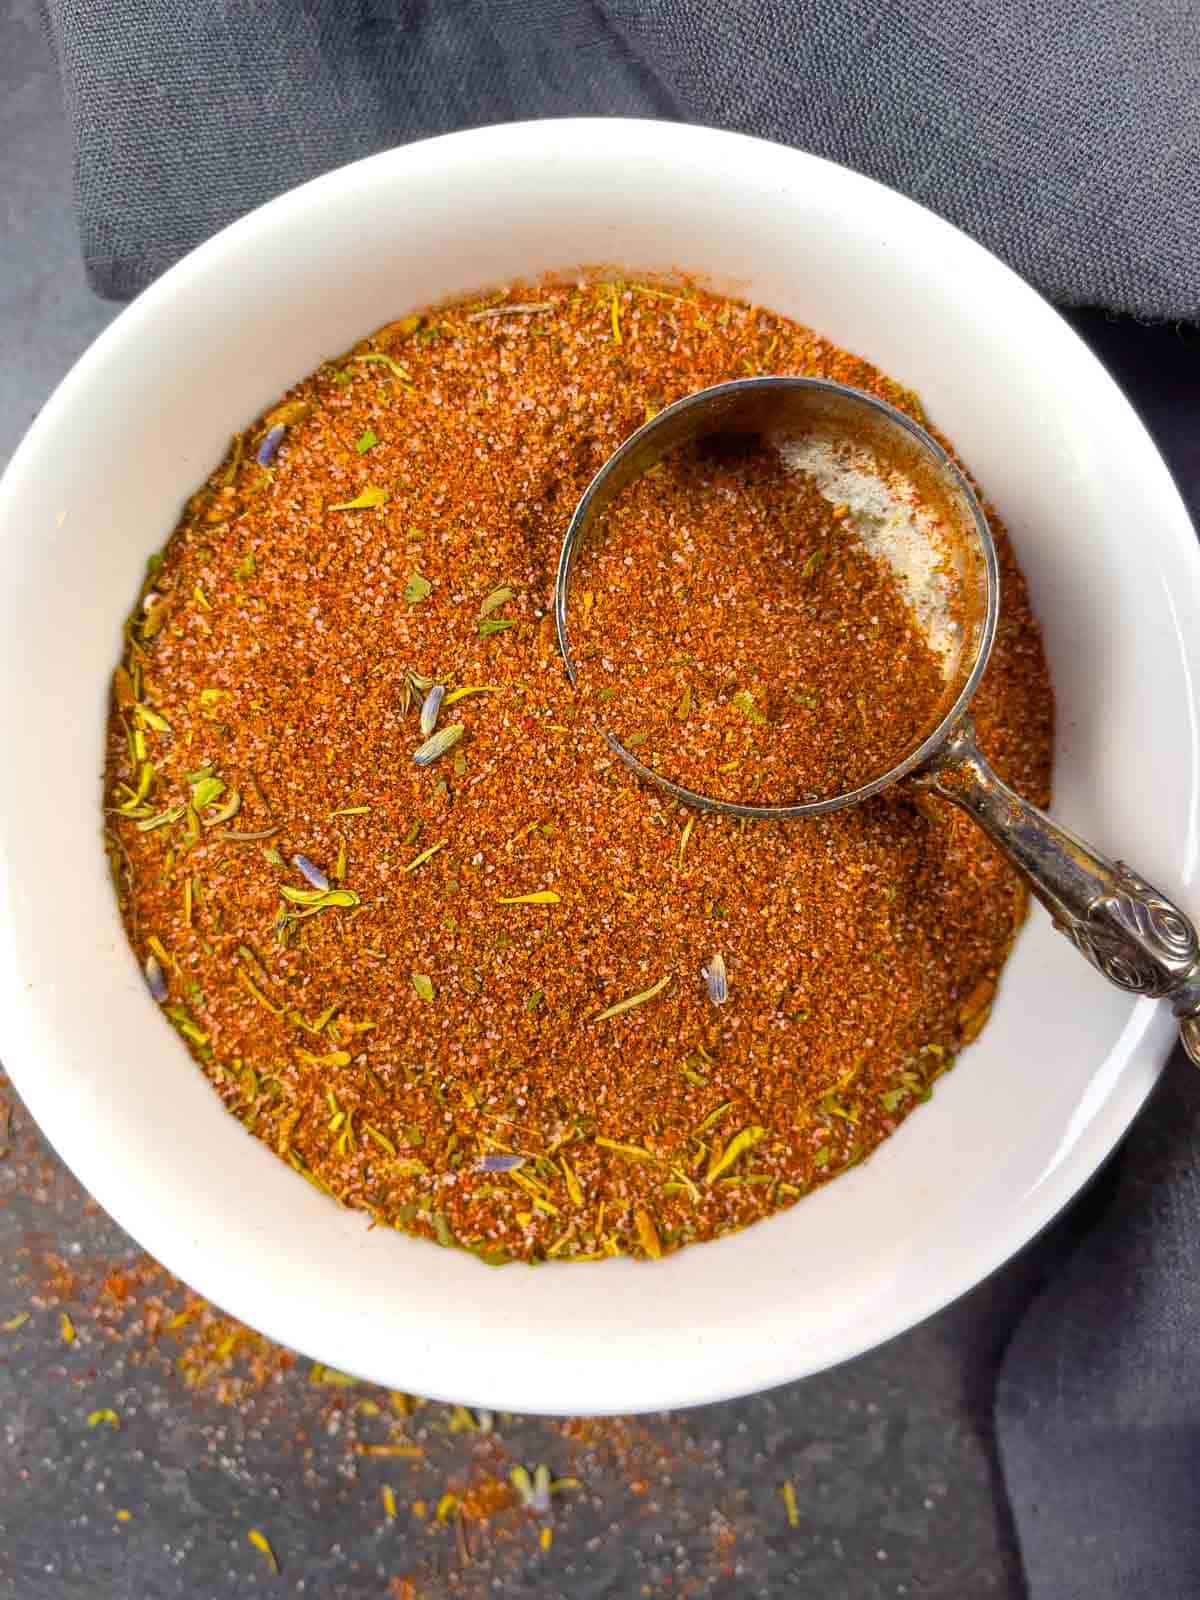 Barbeque rub in a small white bowl with a scoop.